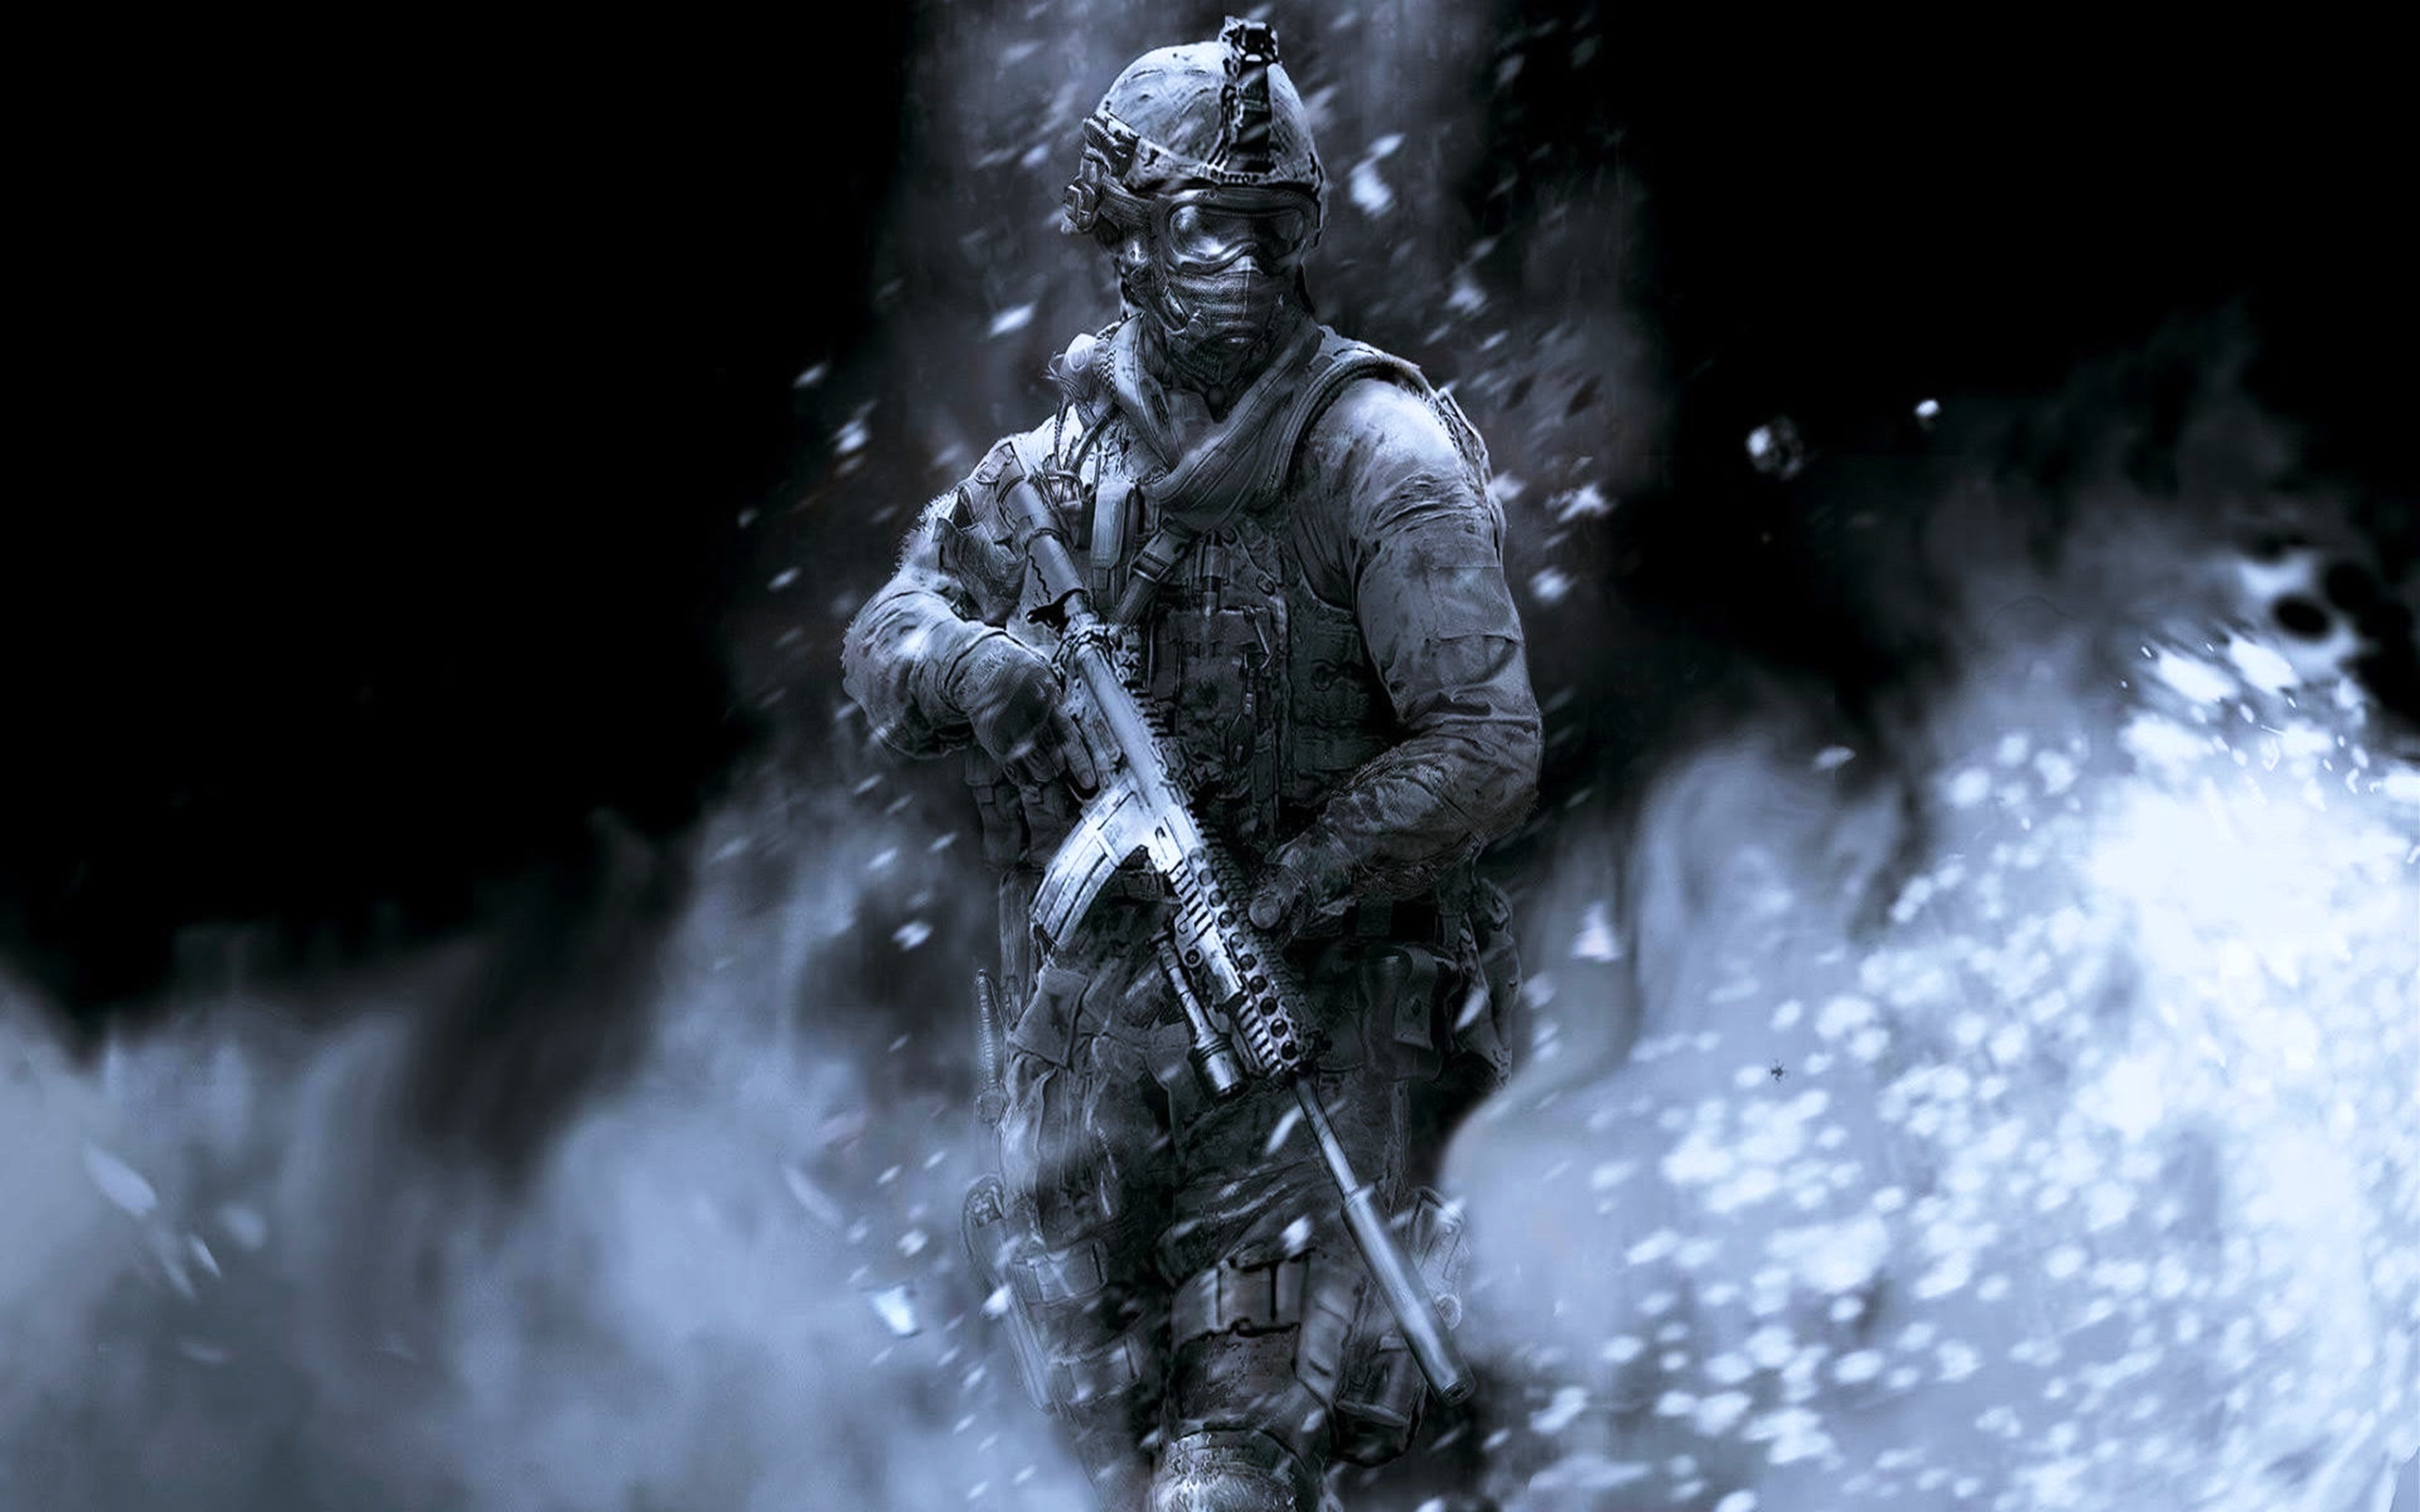 Call Of Duty Ghost Fighter gangs guns Military soldier struggle games wallpaper. Call of duty ghosts, Call of duty, Modern warfare